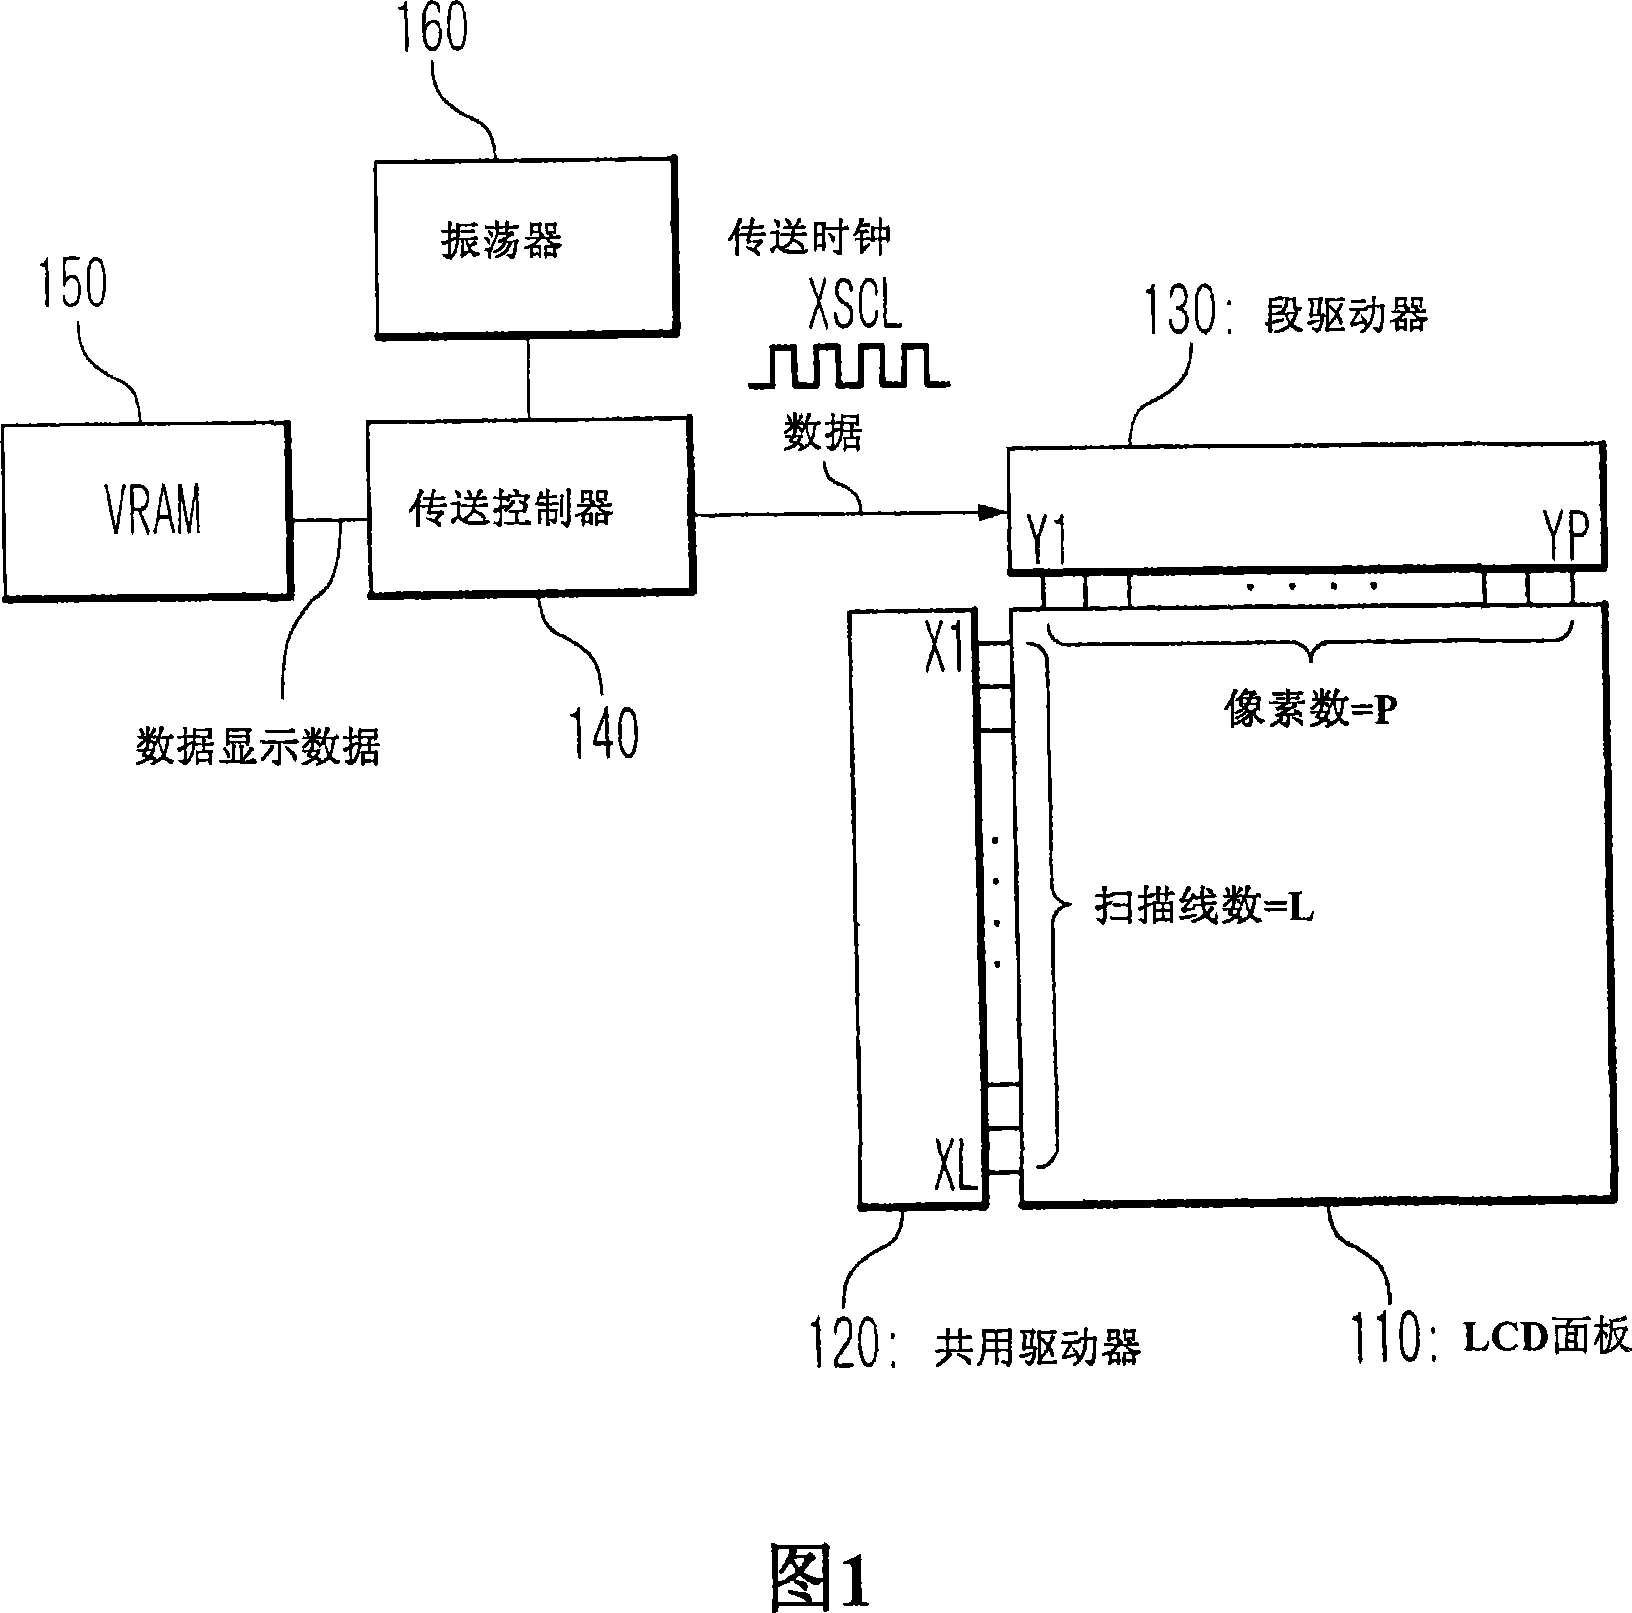 Display controller in display device, and method of transferring display data